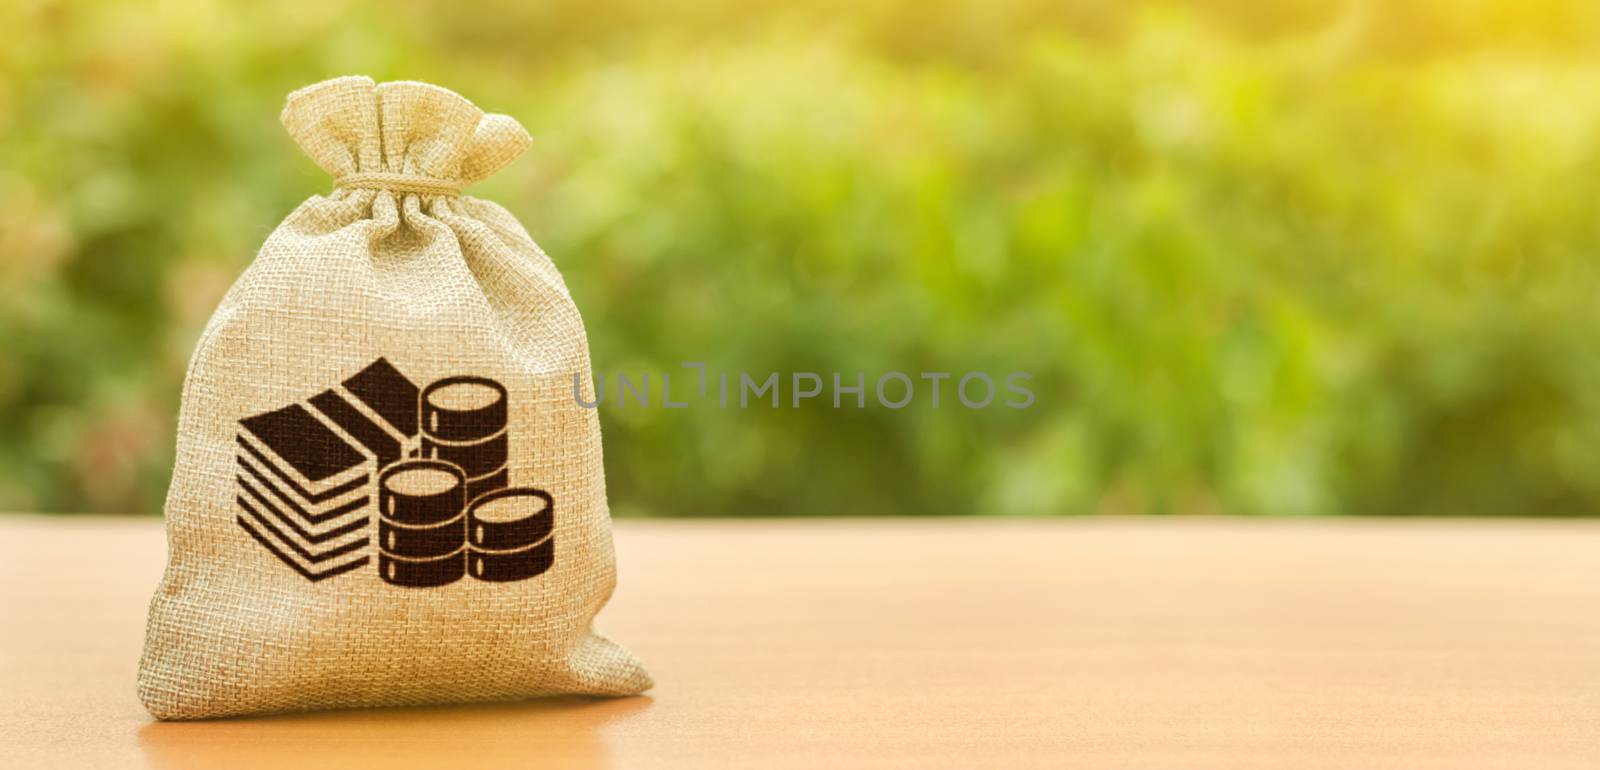 Money bag on nature background. Economics, salary. Business and industry, economic processes. Finance and budgeting, investments, bank deposit interest rates. Profit, income, earnings by iLixe48